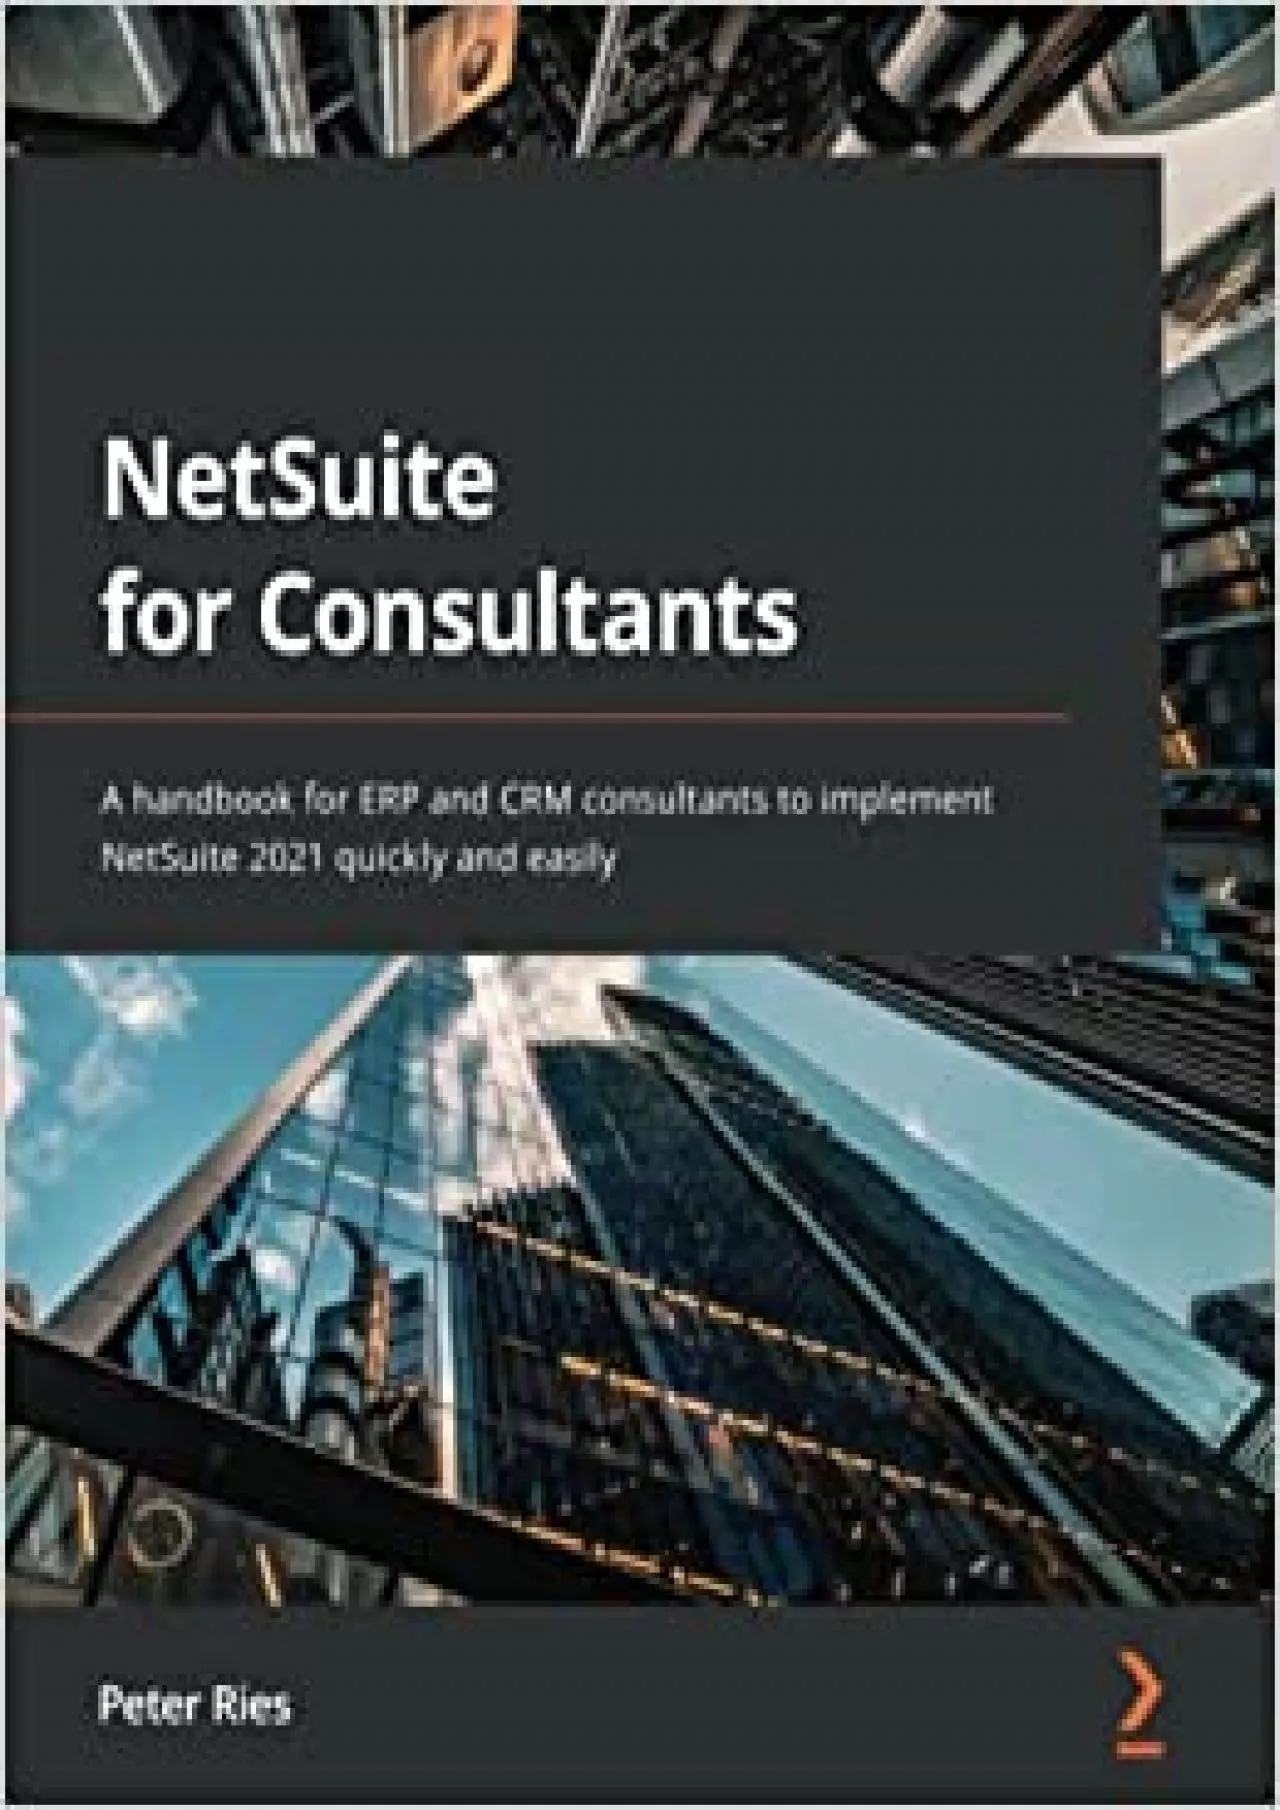 NetSuite for Consultants: A handbook for ERP and CRM consultants to implement NetSuite